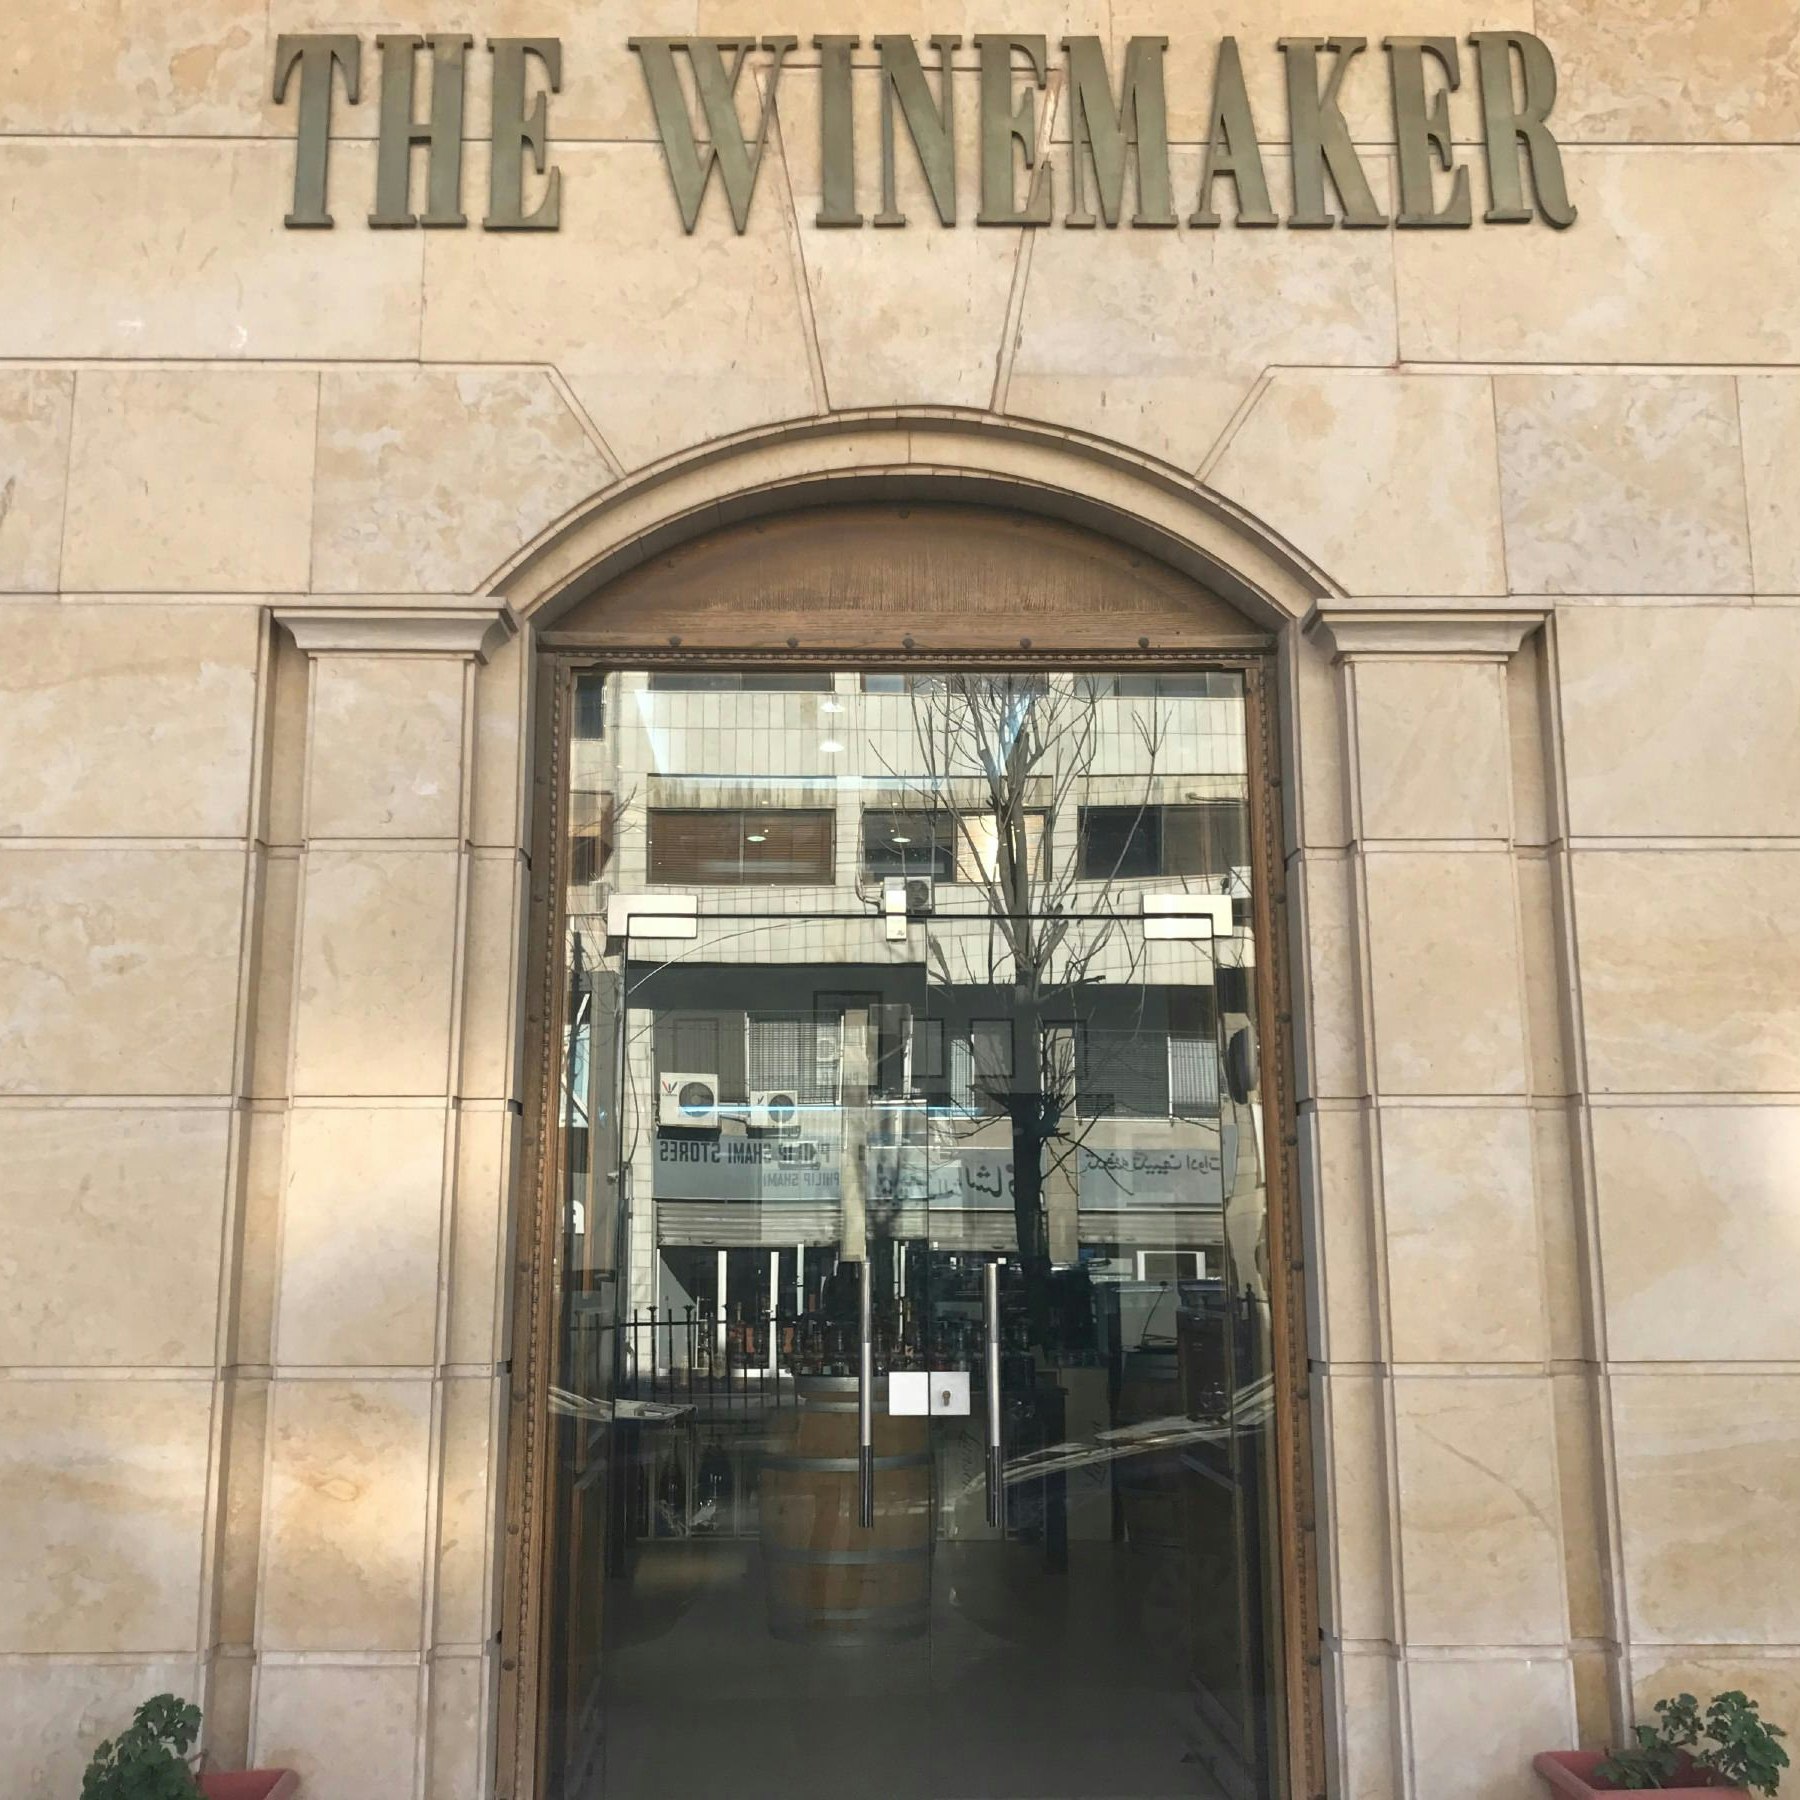 Entrance to The Winemaker